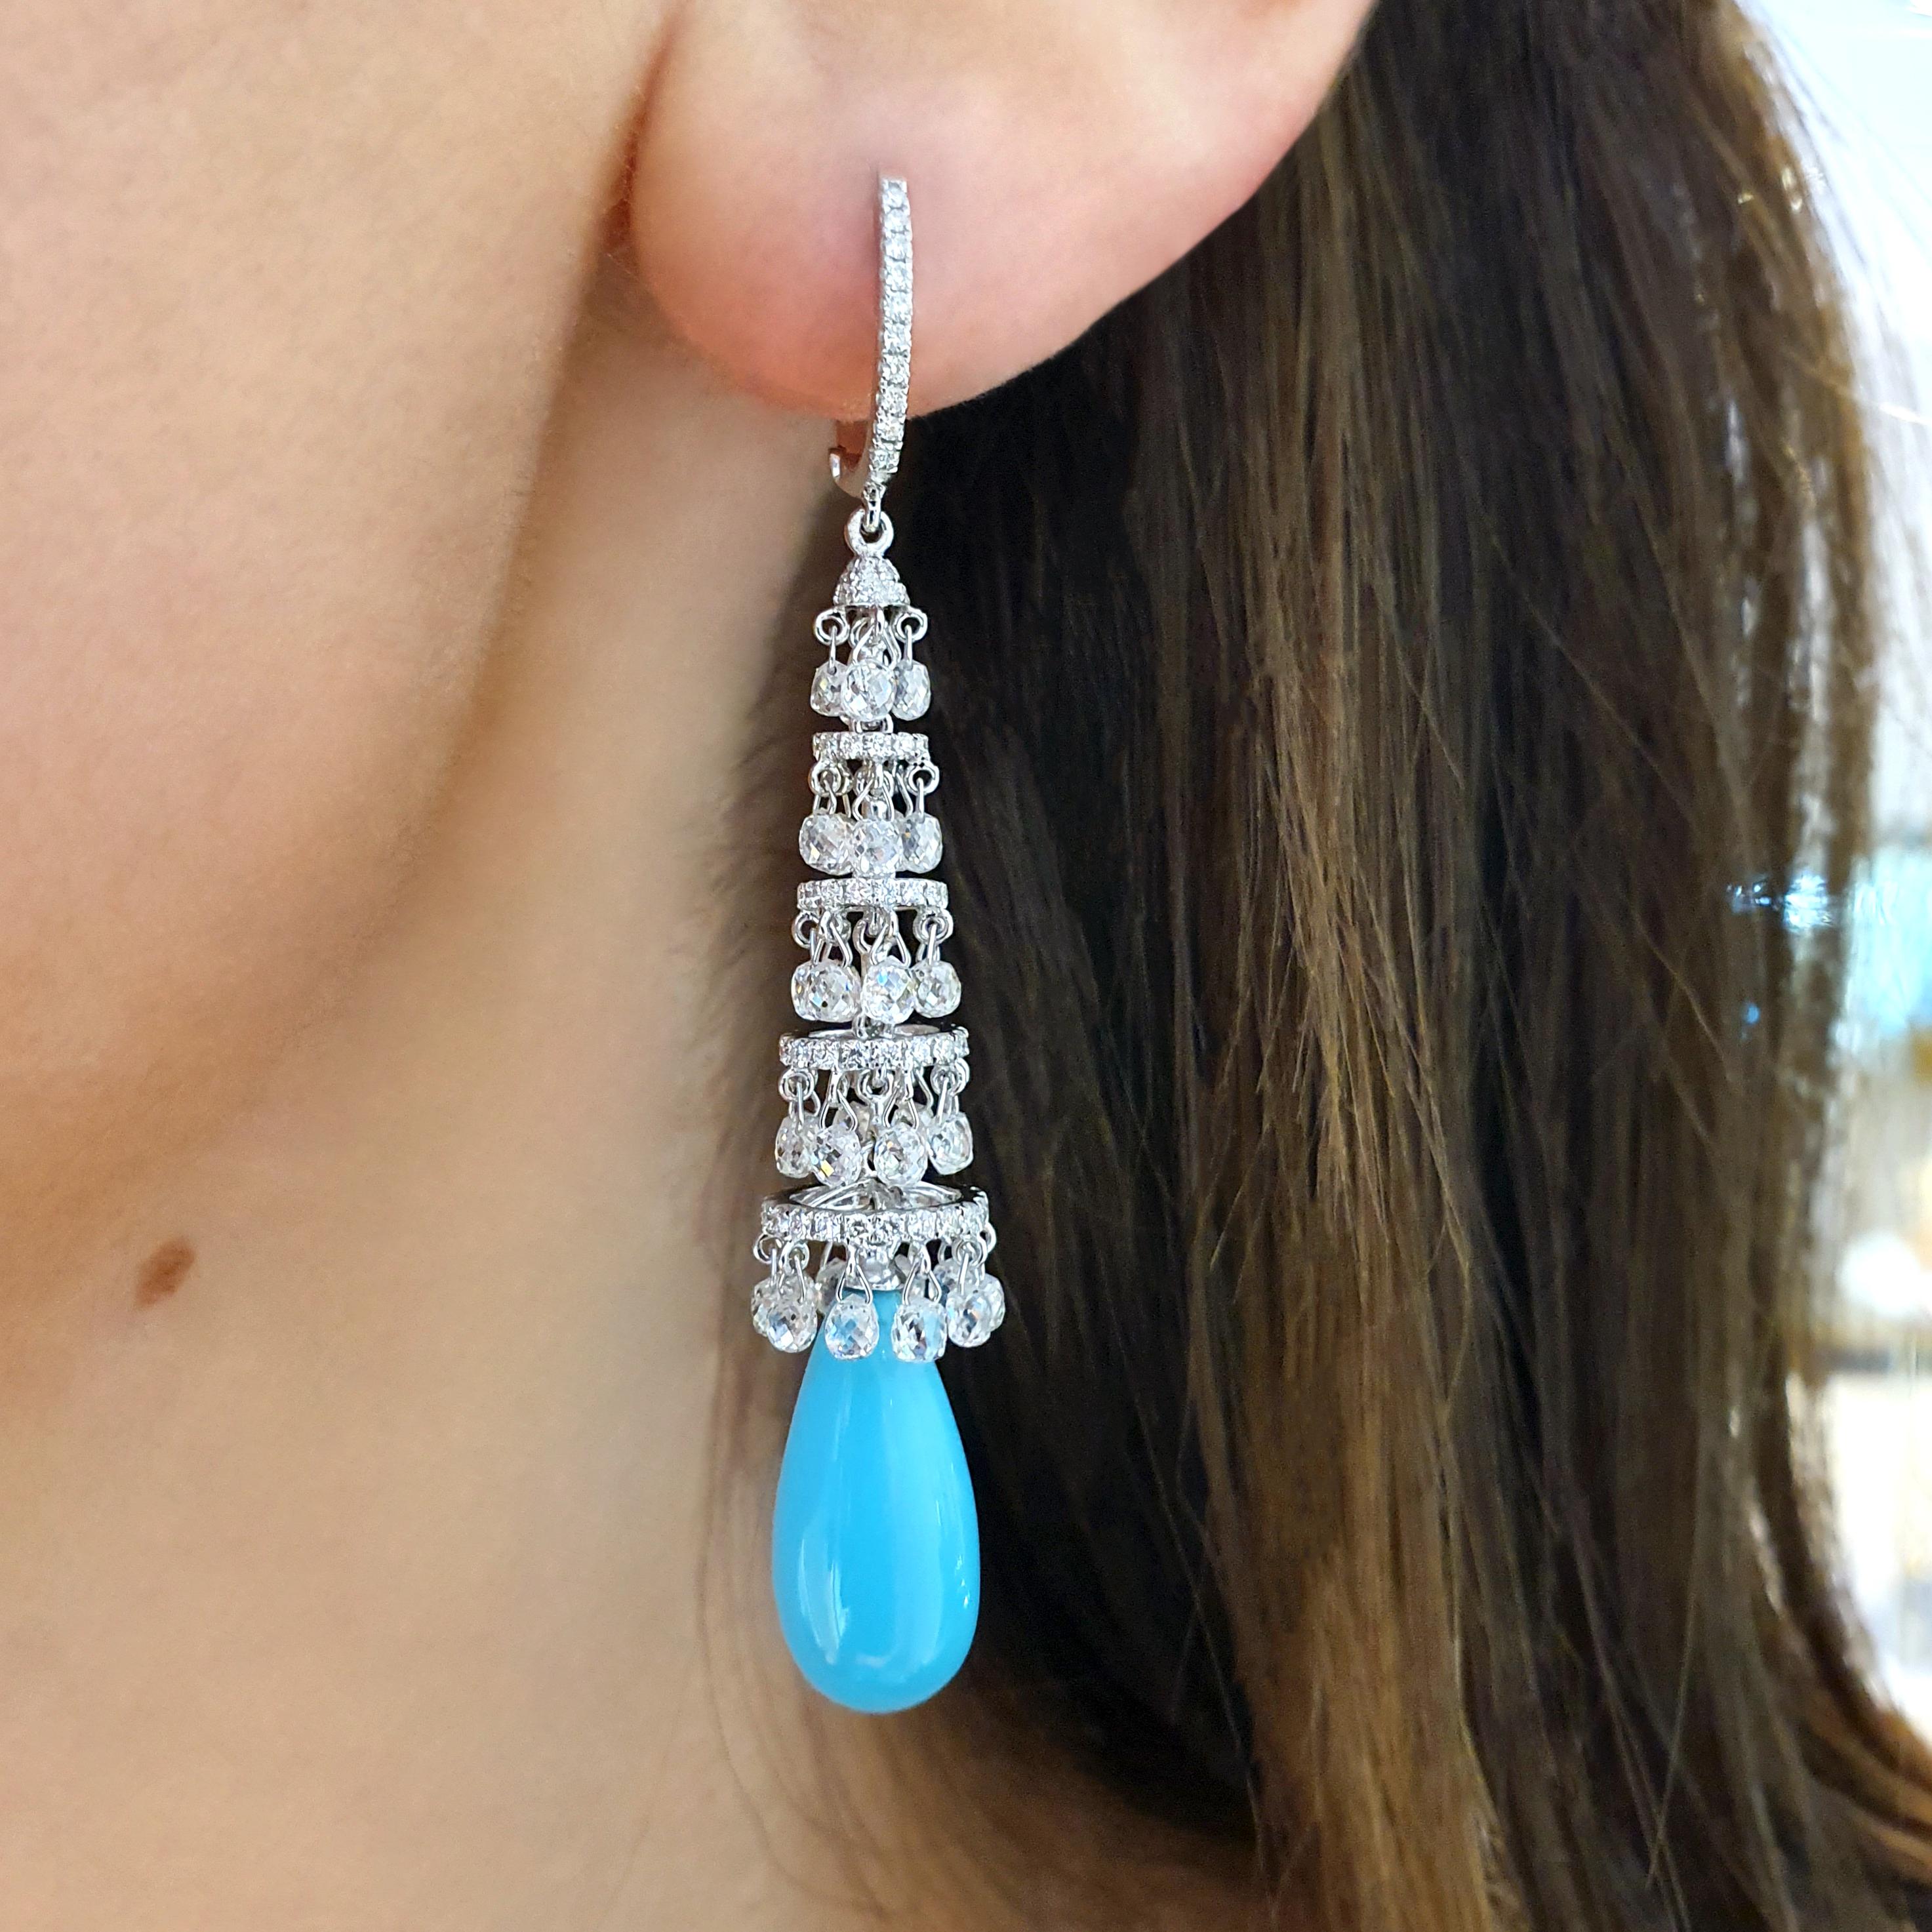 Drop Chandelier Earrings in white gold 18K briolette cut 6.07 carat and round diamond 0.84 carat estimated G color holding one Turquoise drop each, total 13.53 carat.
Total gross weight: 9.32 grams.
Total length: 5.00 centimeters.
